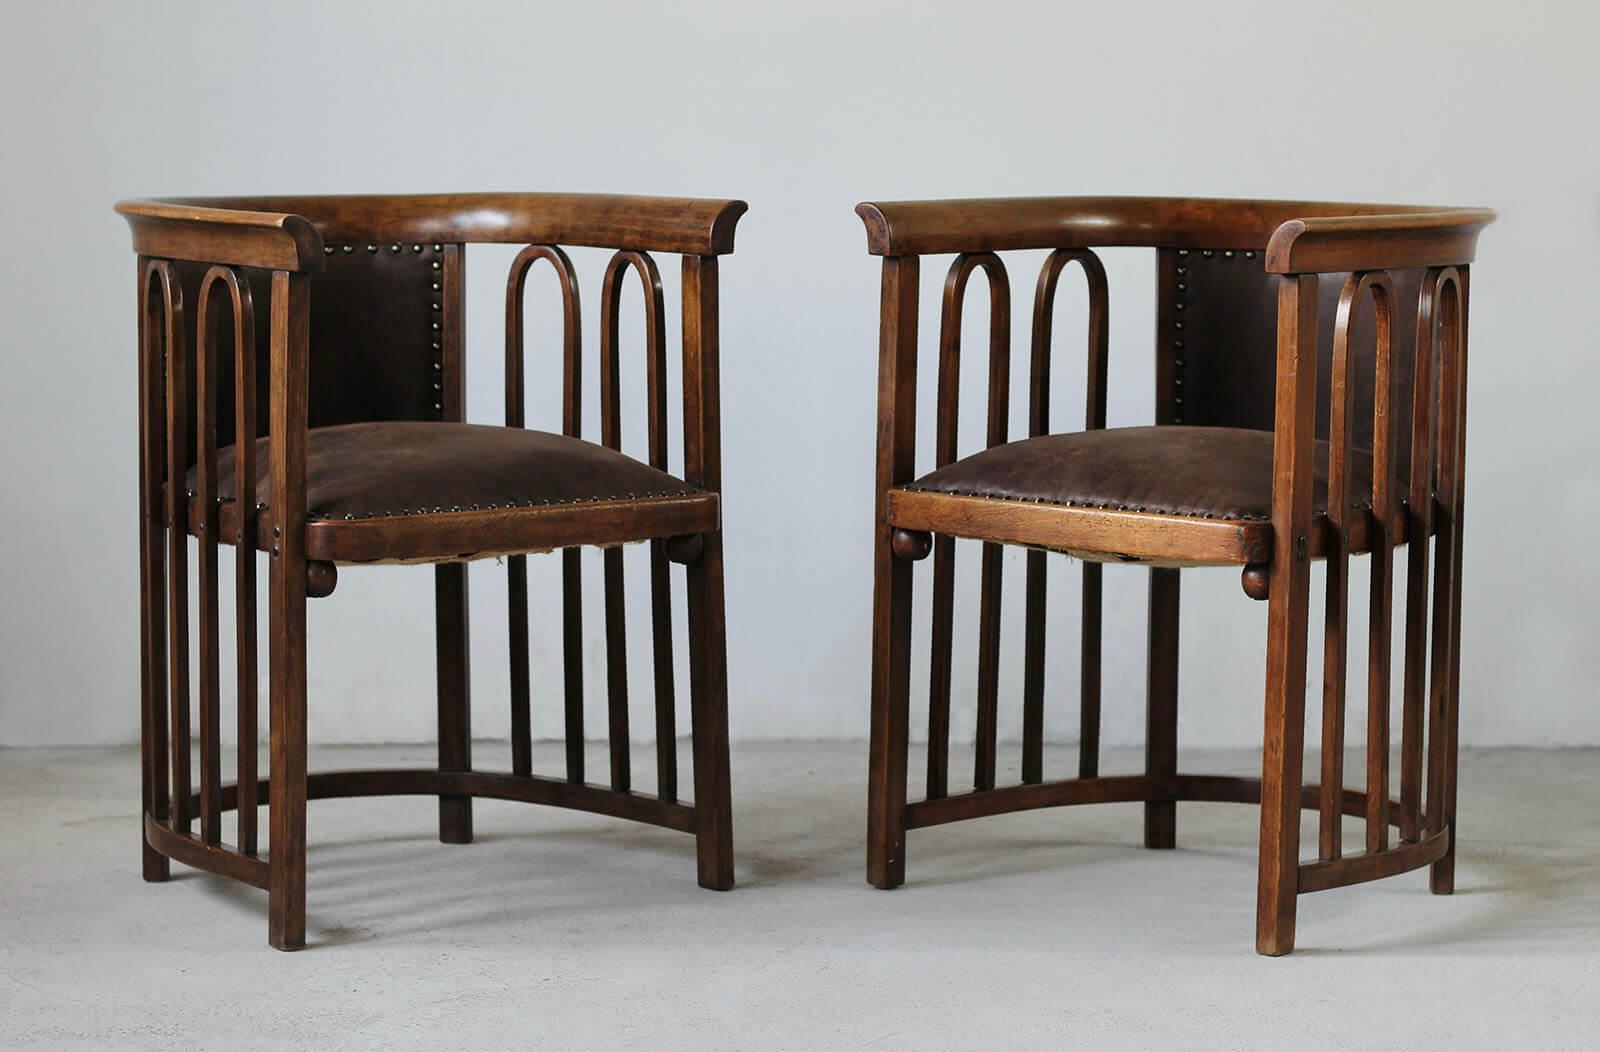 Set of two Armchairs designed by famous Josef Hoffmann. One of his iconic models – number 423. The armchairs have been professionally restored and reupholstered with high quality leather in chocolate brown color. The wooden elements have been